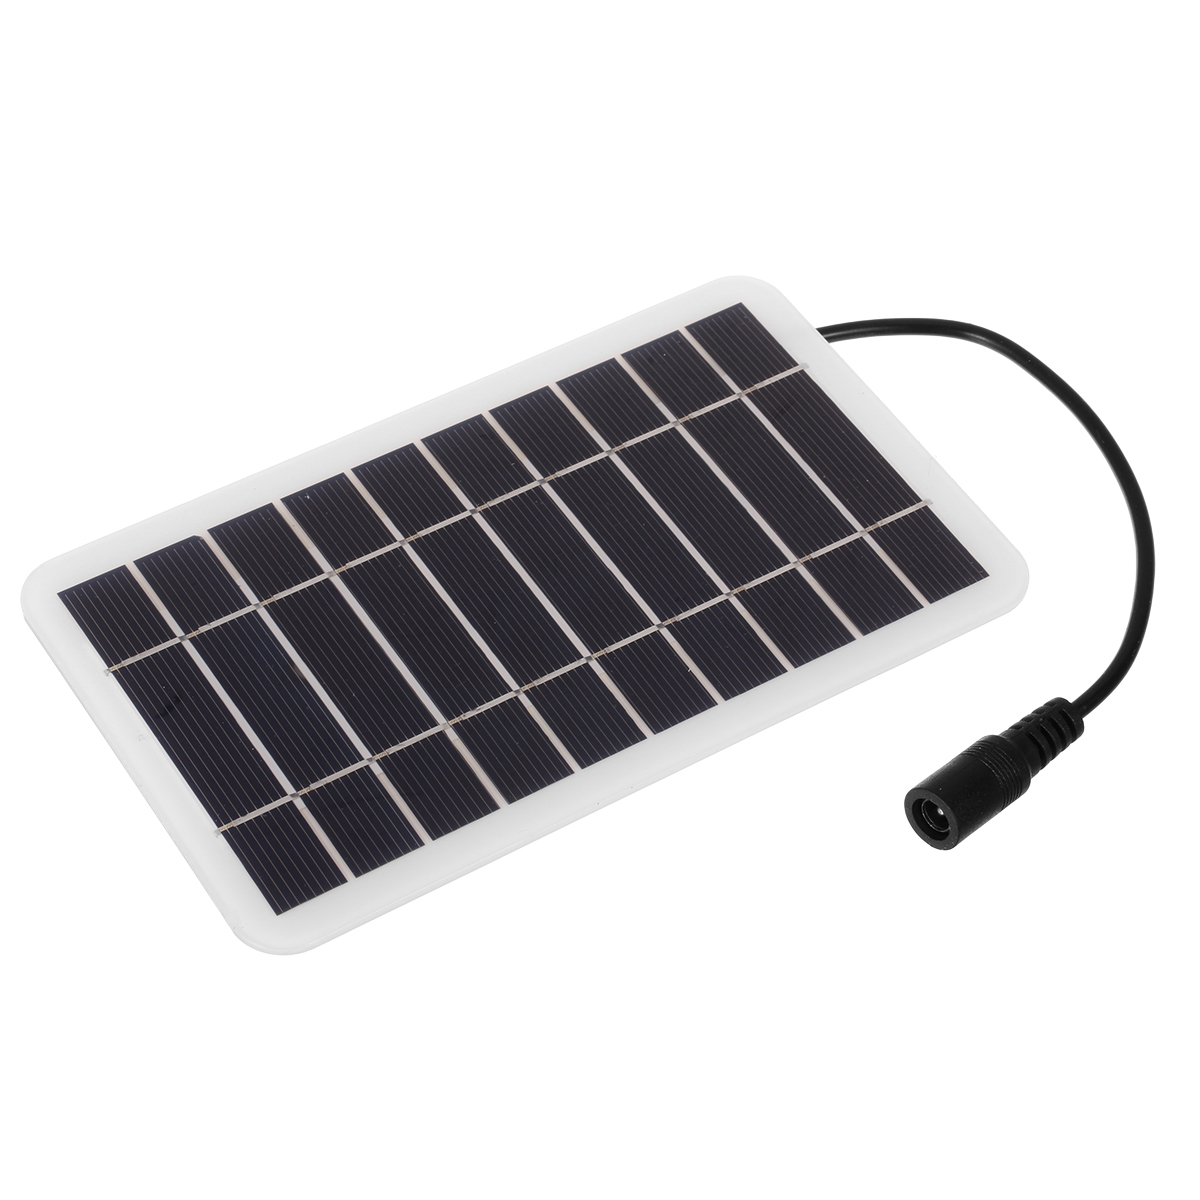 100W-Portable-Solar-Panel-Kit-Dual-DC-5V-USB-Charger-Kit-Solar-Power-Controller-with-Fans-1905897-8